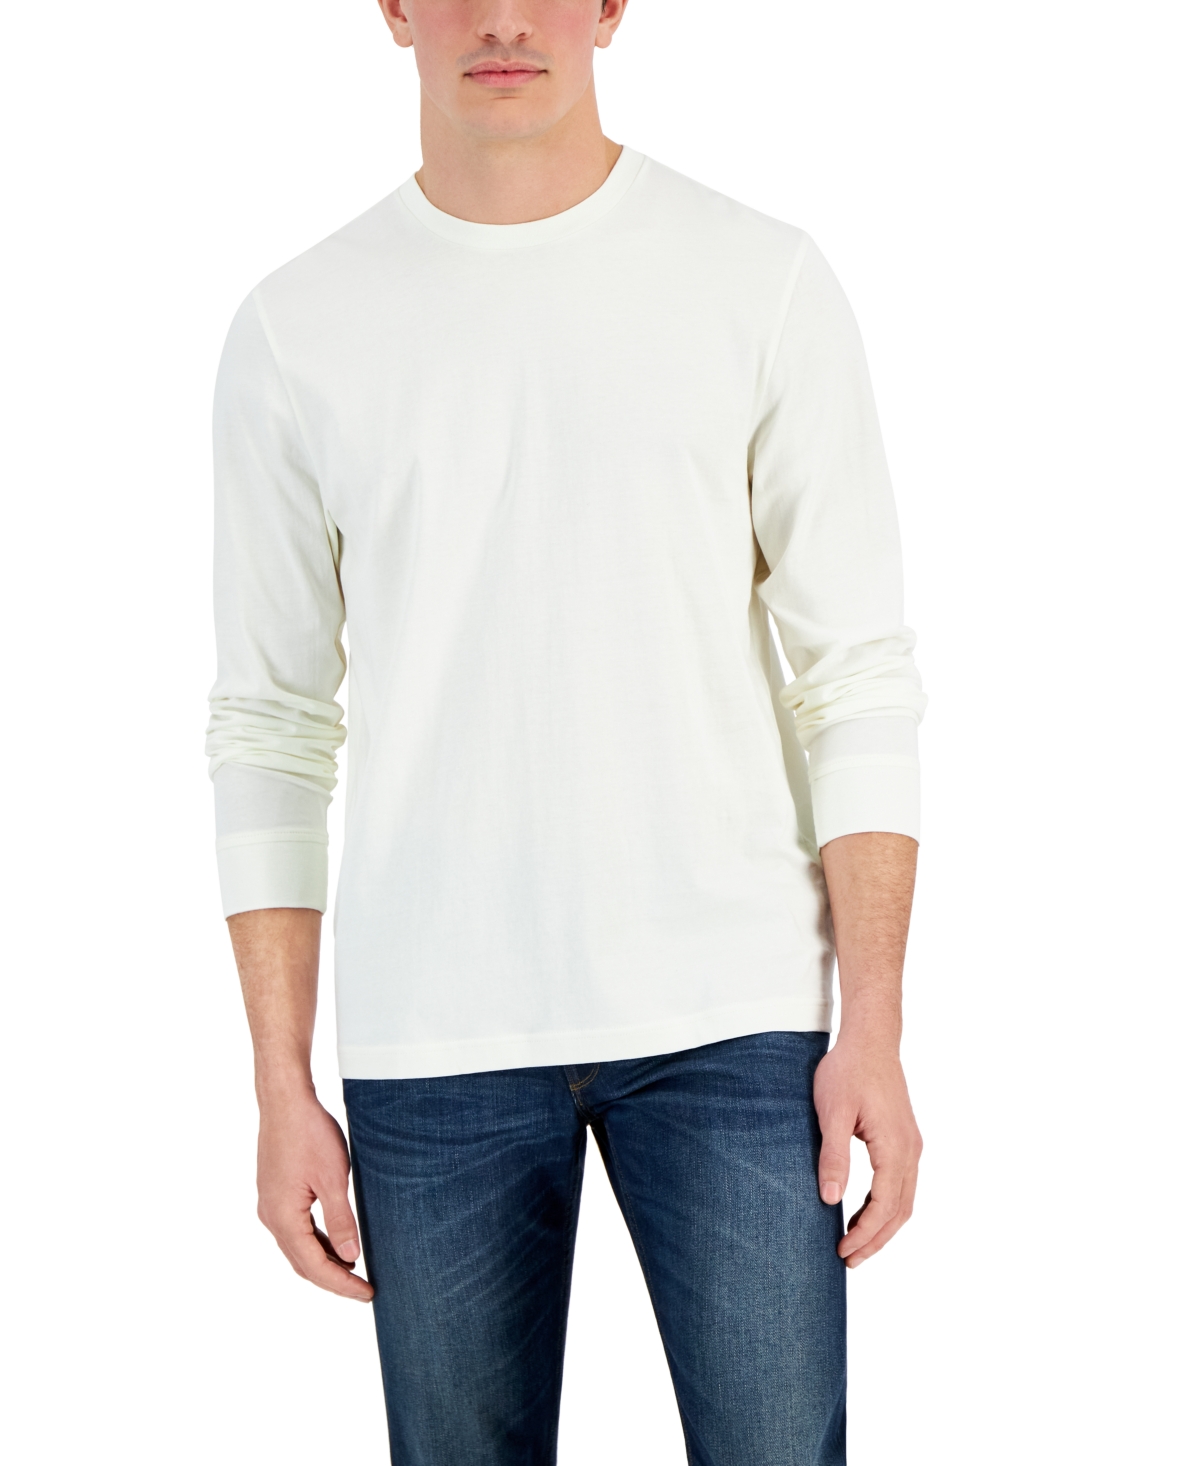 Club Room Men's Thermal Henley Shirt, Created for Macy's - Macy's